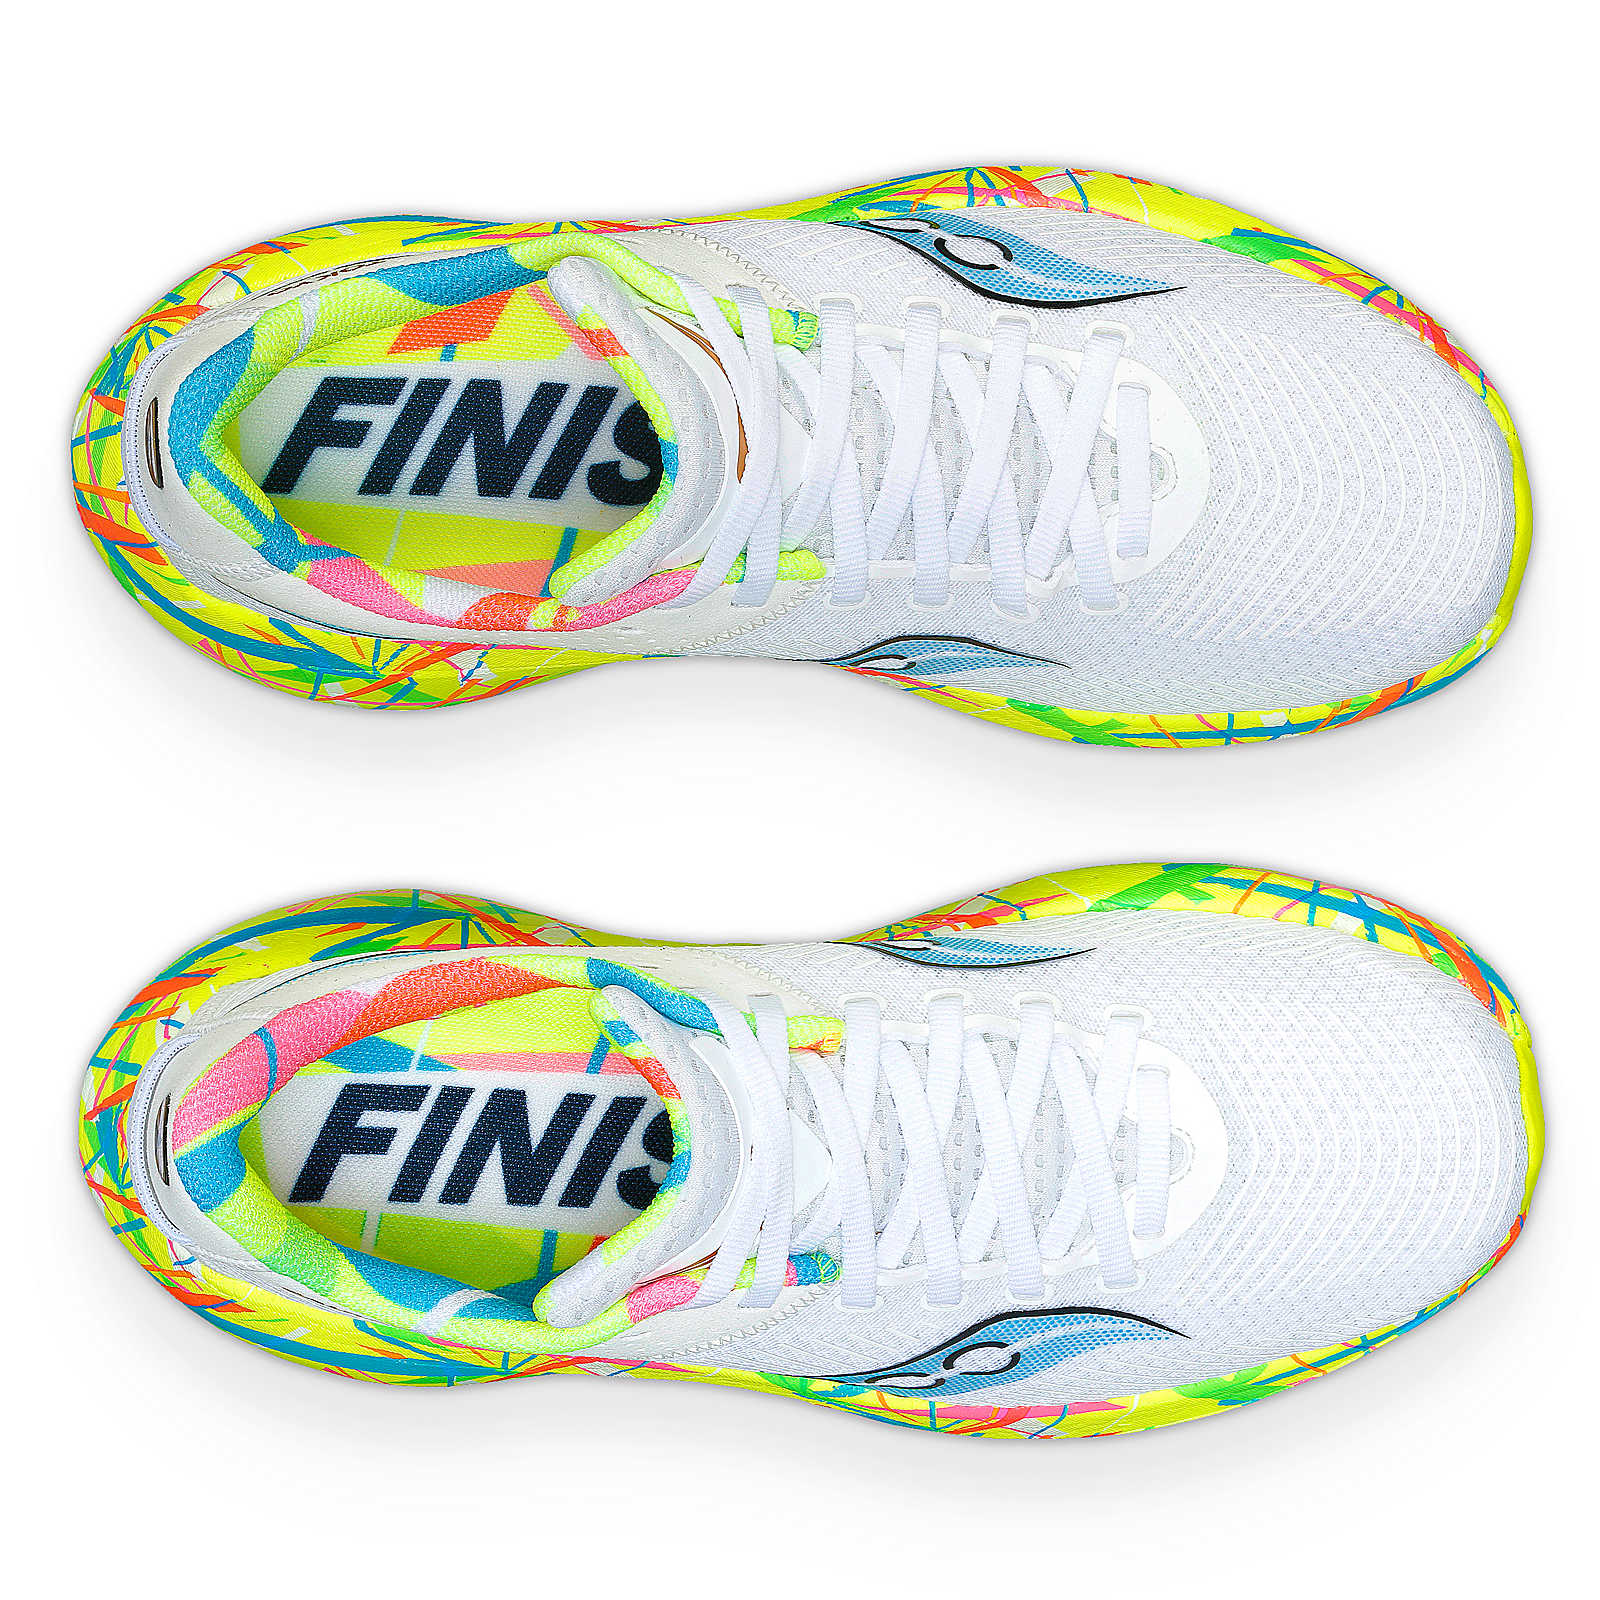 The bright design of the midsole also carrys through and has the same design around the heel collar